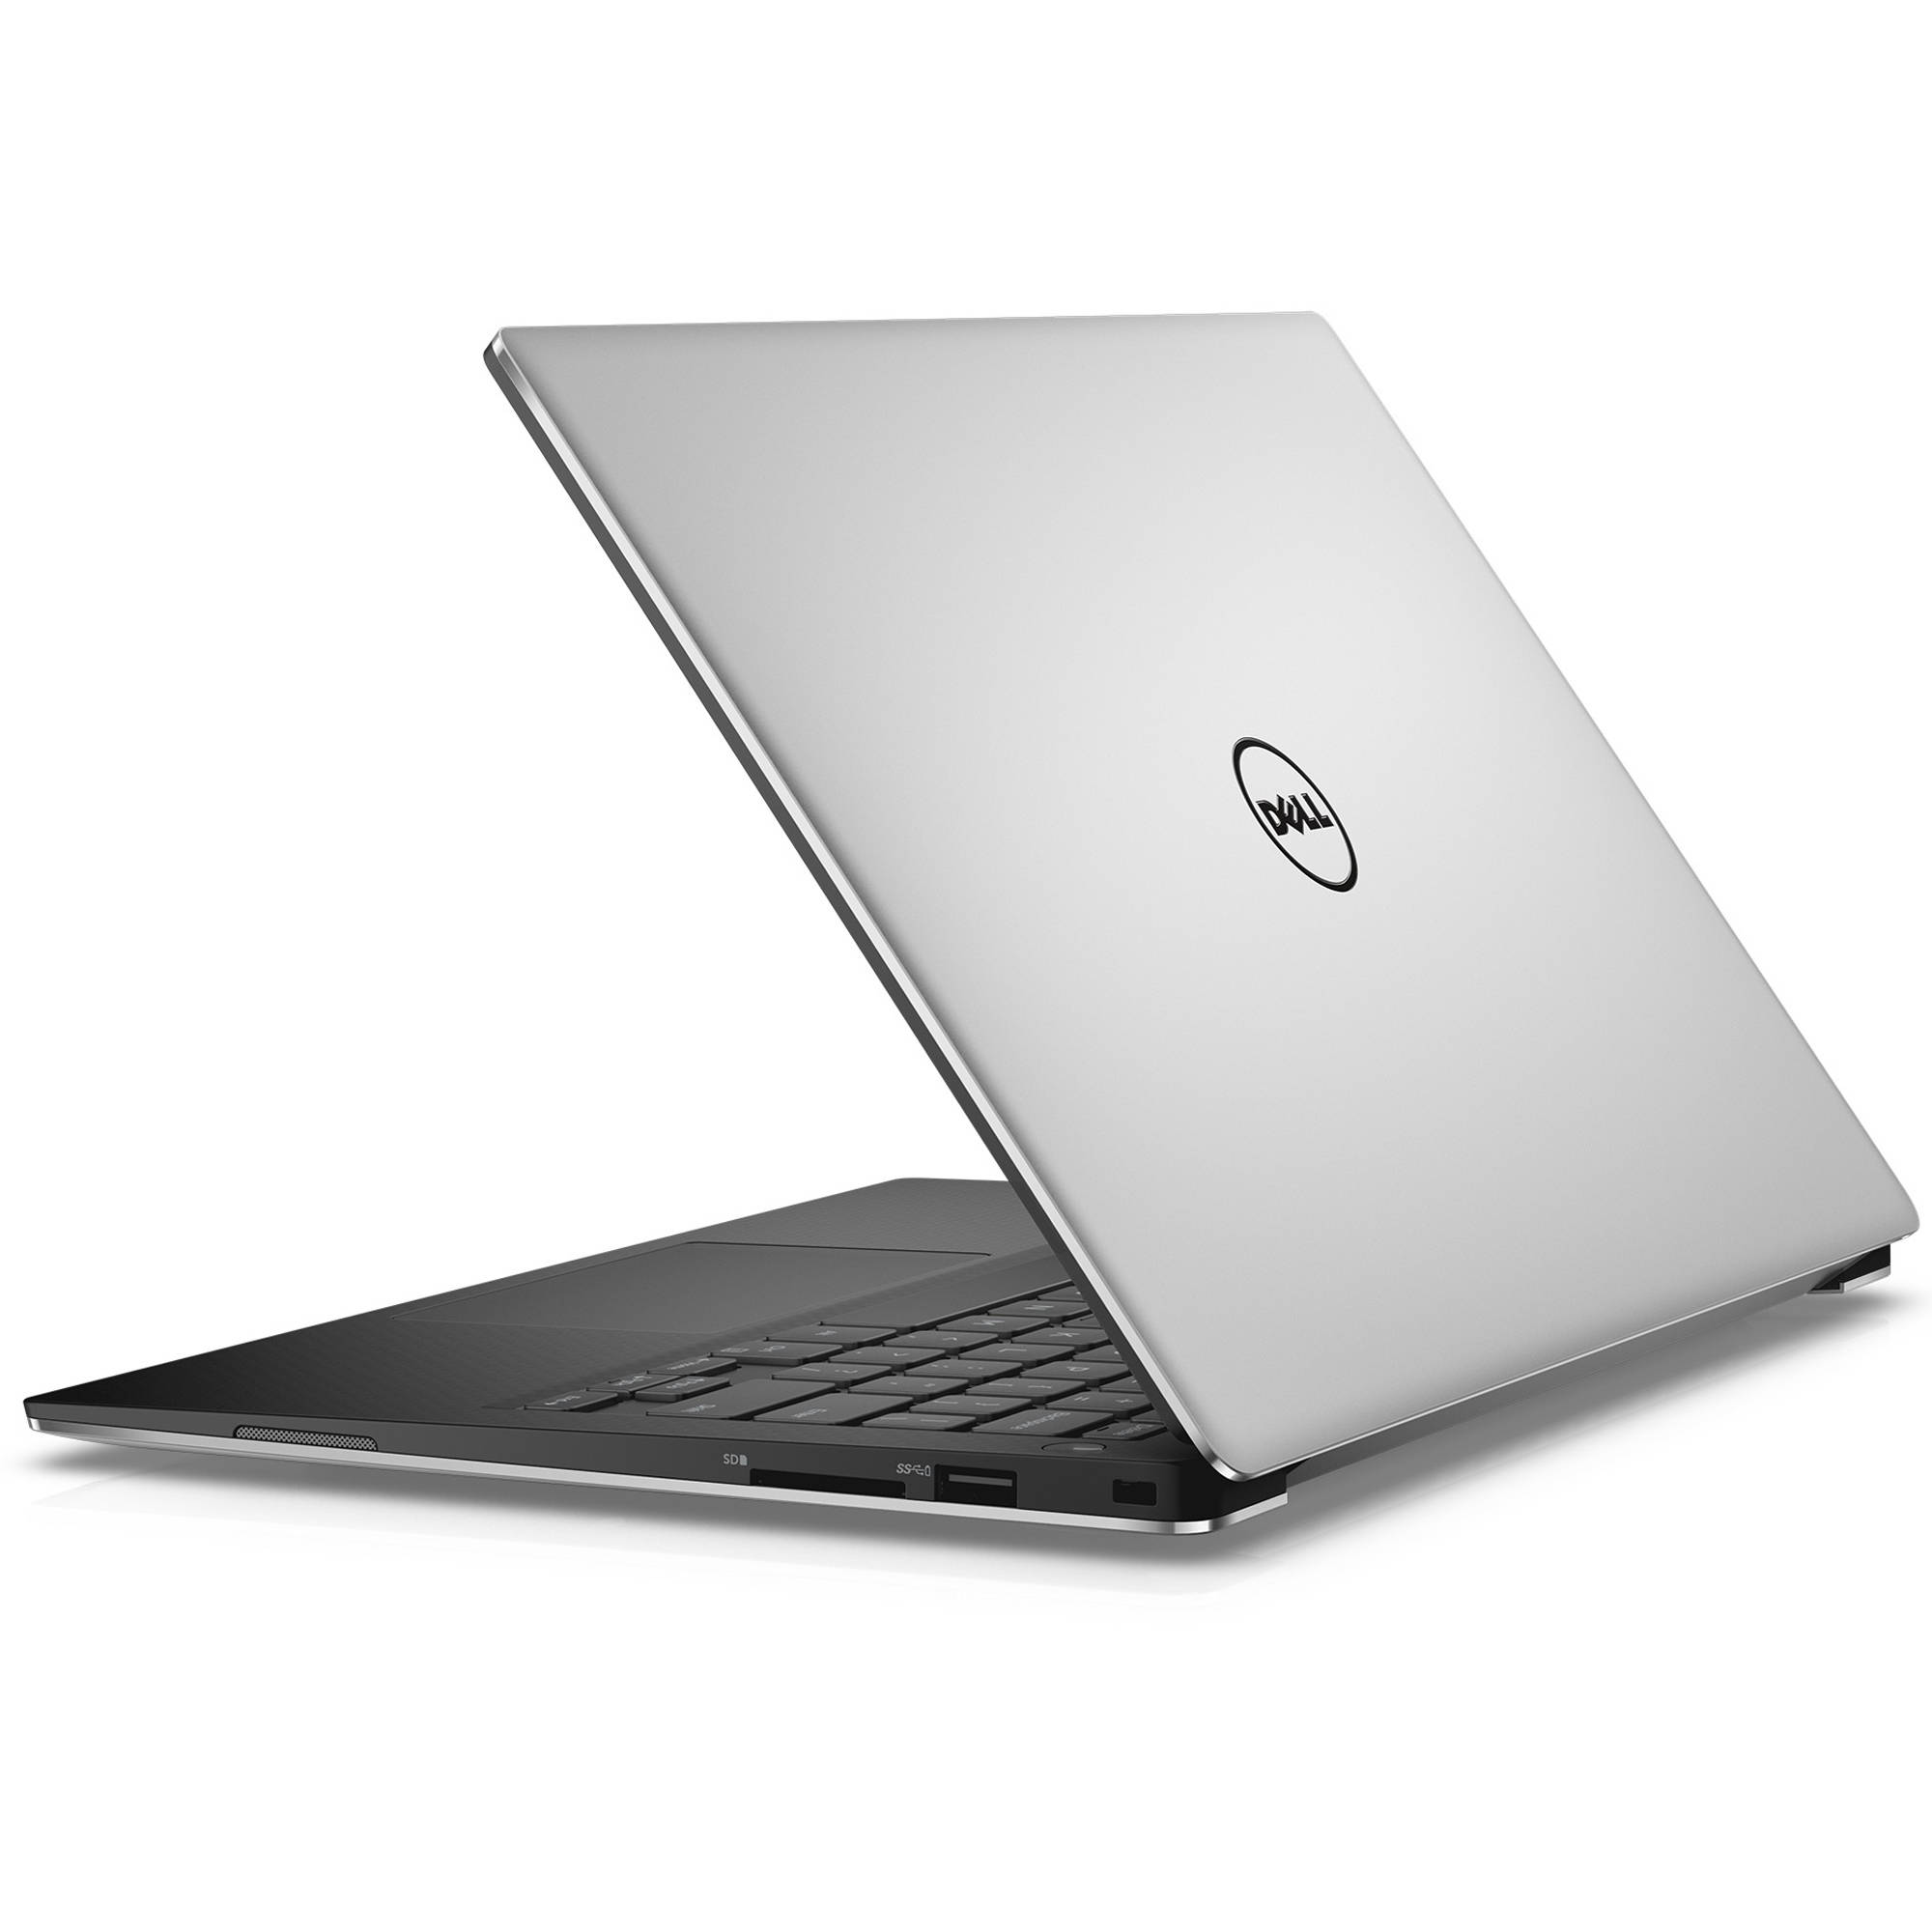 Dell XPS 13 9360 - Intel Core i5 - 7200U / up to 3.1 GHz - Win 10 Home 64-bit - HD Graphics 620 - 8 GB RAM - 256 GB SSD - 13.3" touchscreen 3200 x 1800 (QHD+) - Wi-Fi 5 - silver - kbd: English - with 1 Year Hardware Service with Onsite/In-Home Service After Remote Diagnosis - image 4 of 25